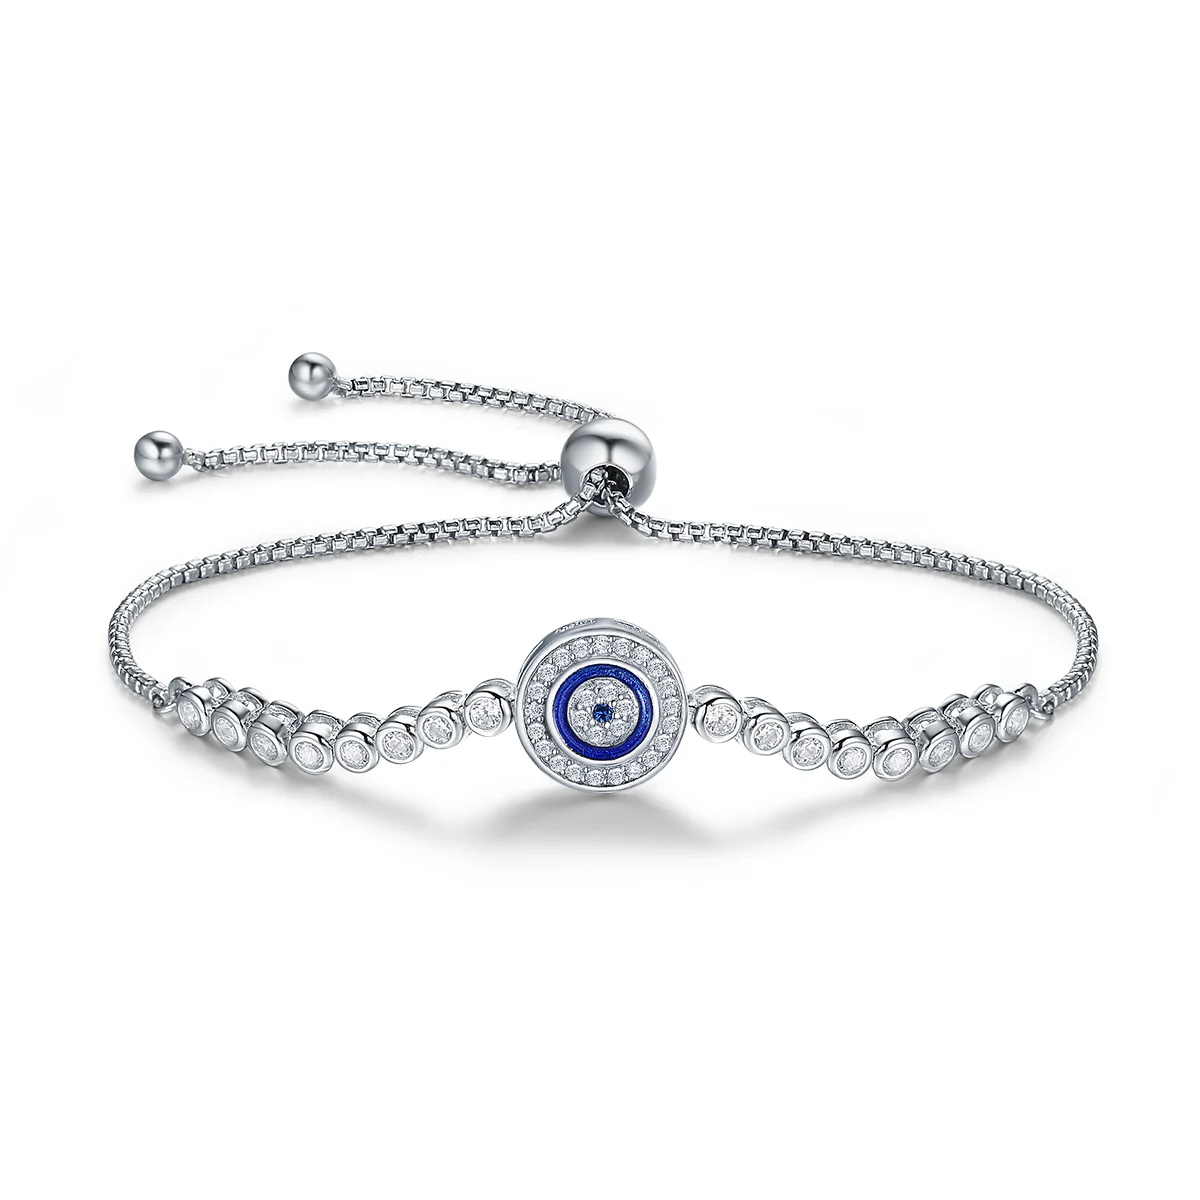 Authentic 925 Sterling Silver Luck Evil Eye Charm Adjustable Bracelet Chain